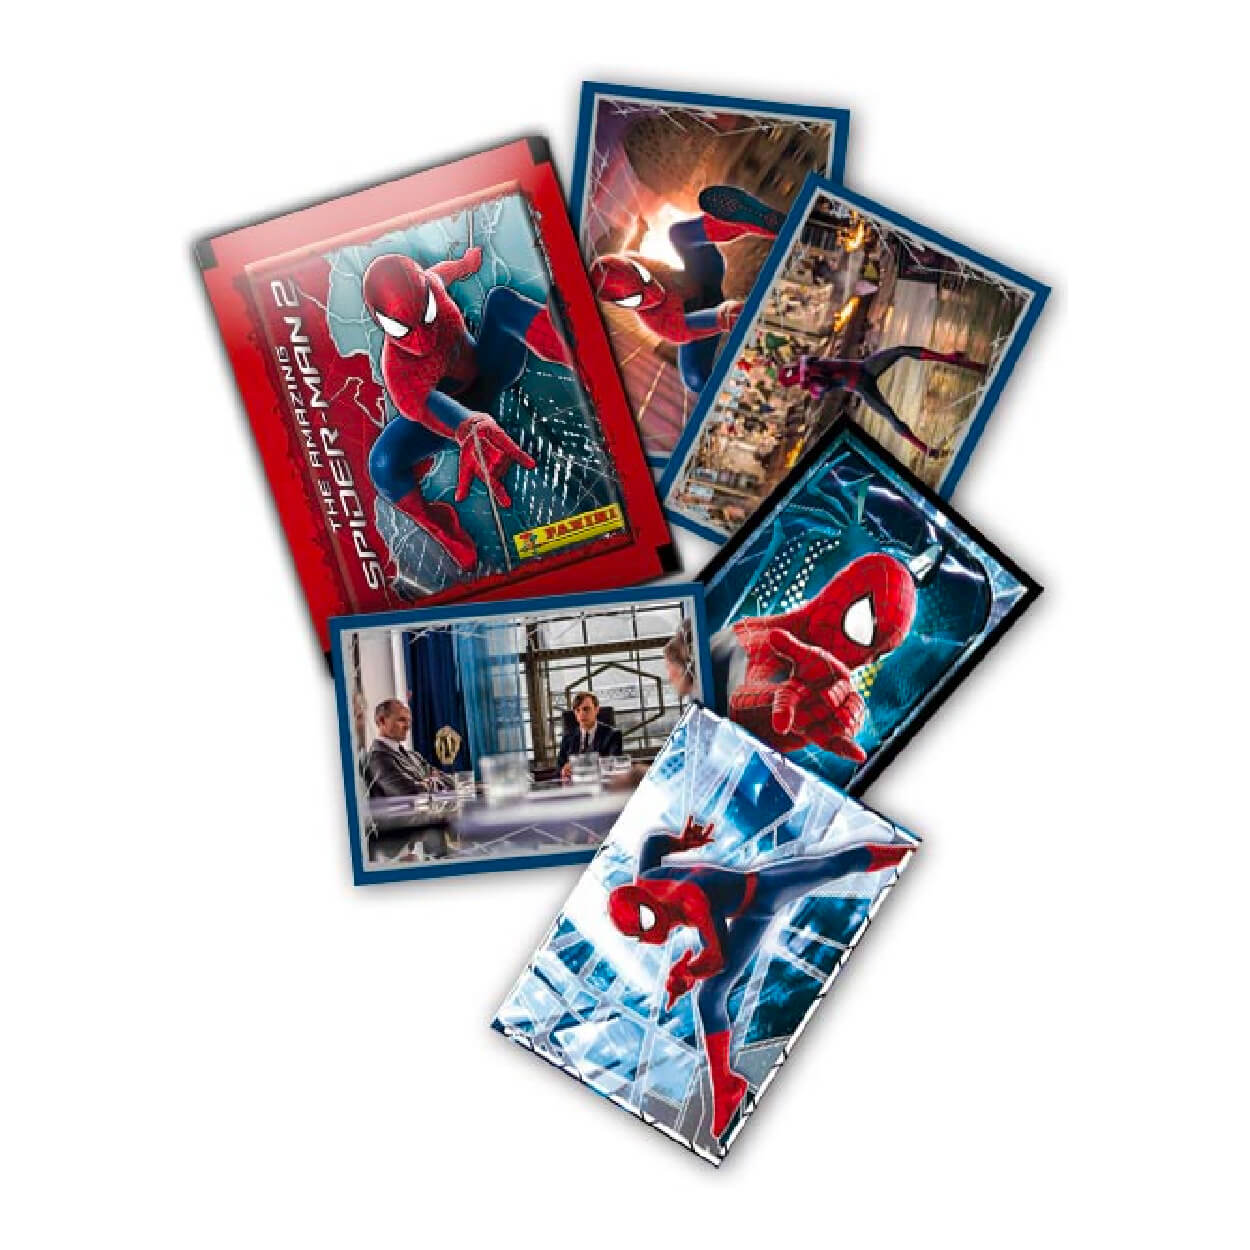 Panini| Amazing Spiderman Sticker Collection | Earthlets.com |  | Sticker Collection